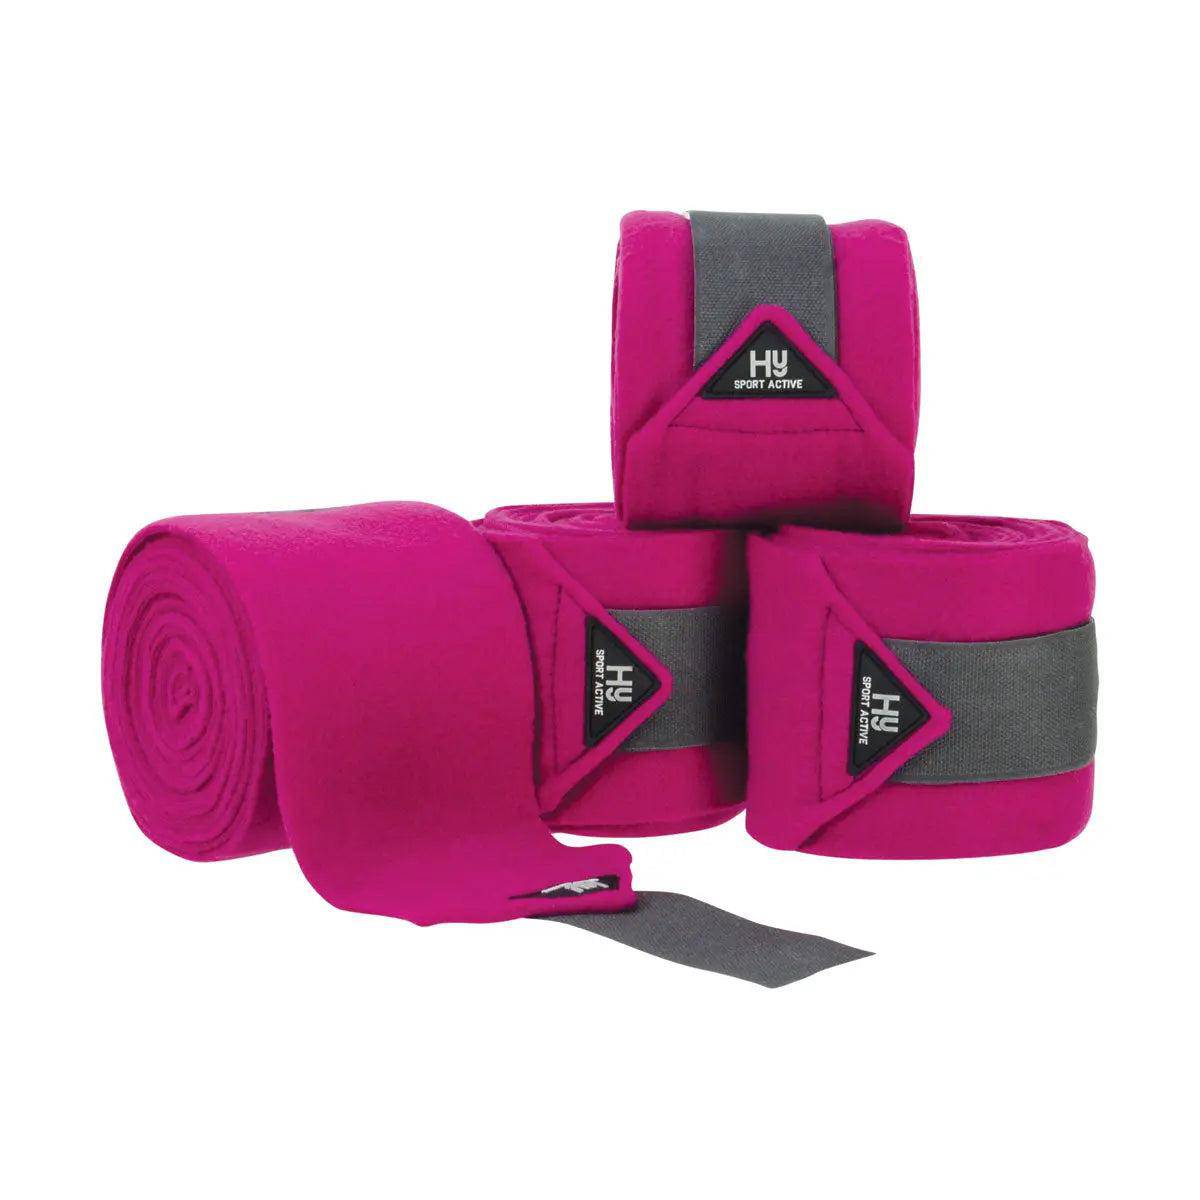 Hy Sport Active Luxury Bandages   Barnstaple Equestrian Supplies